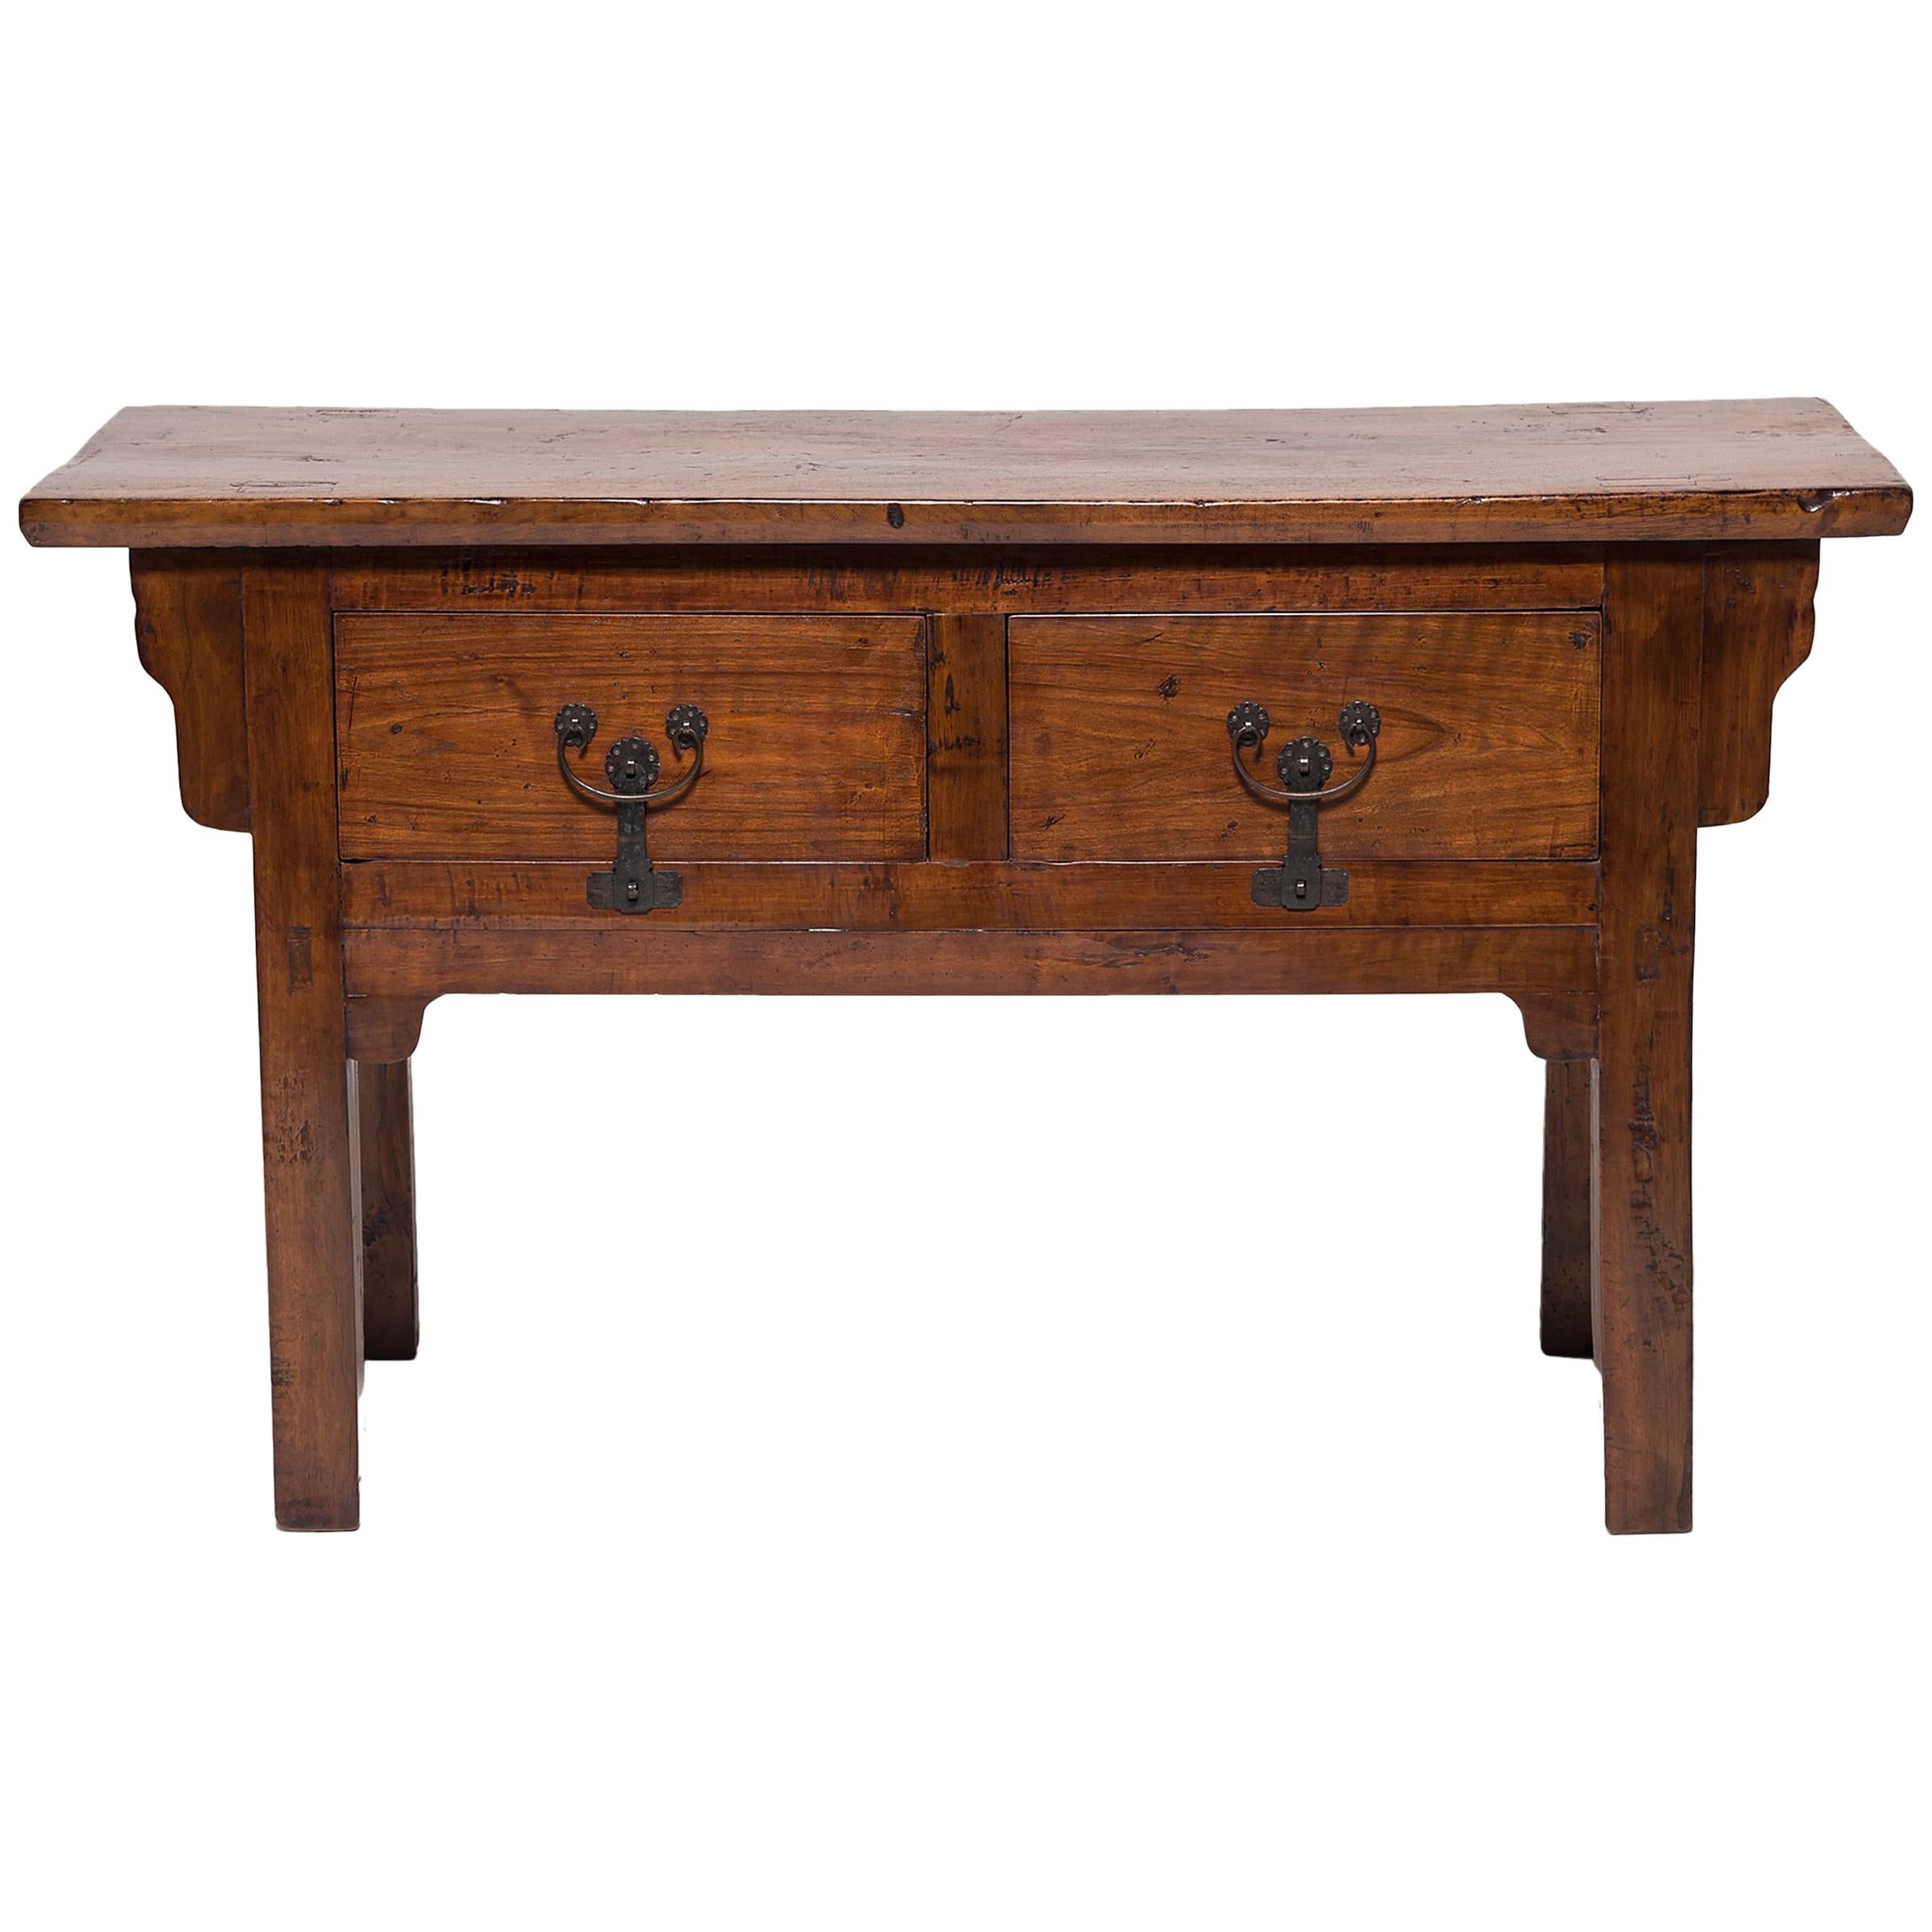 19th Century Chinese Courtyard Console Table